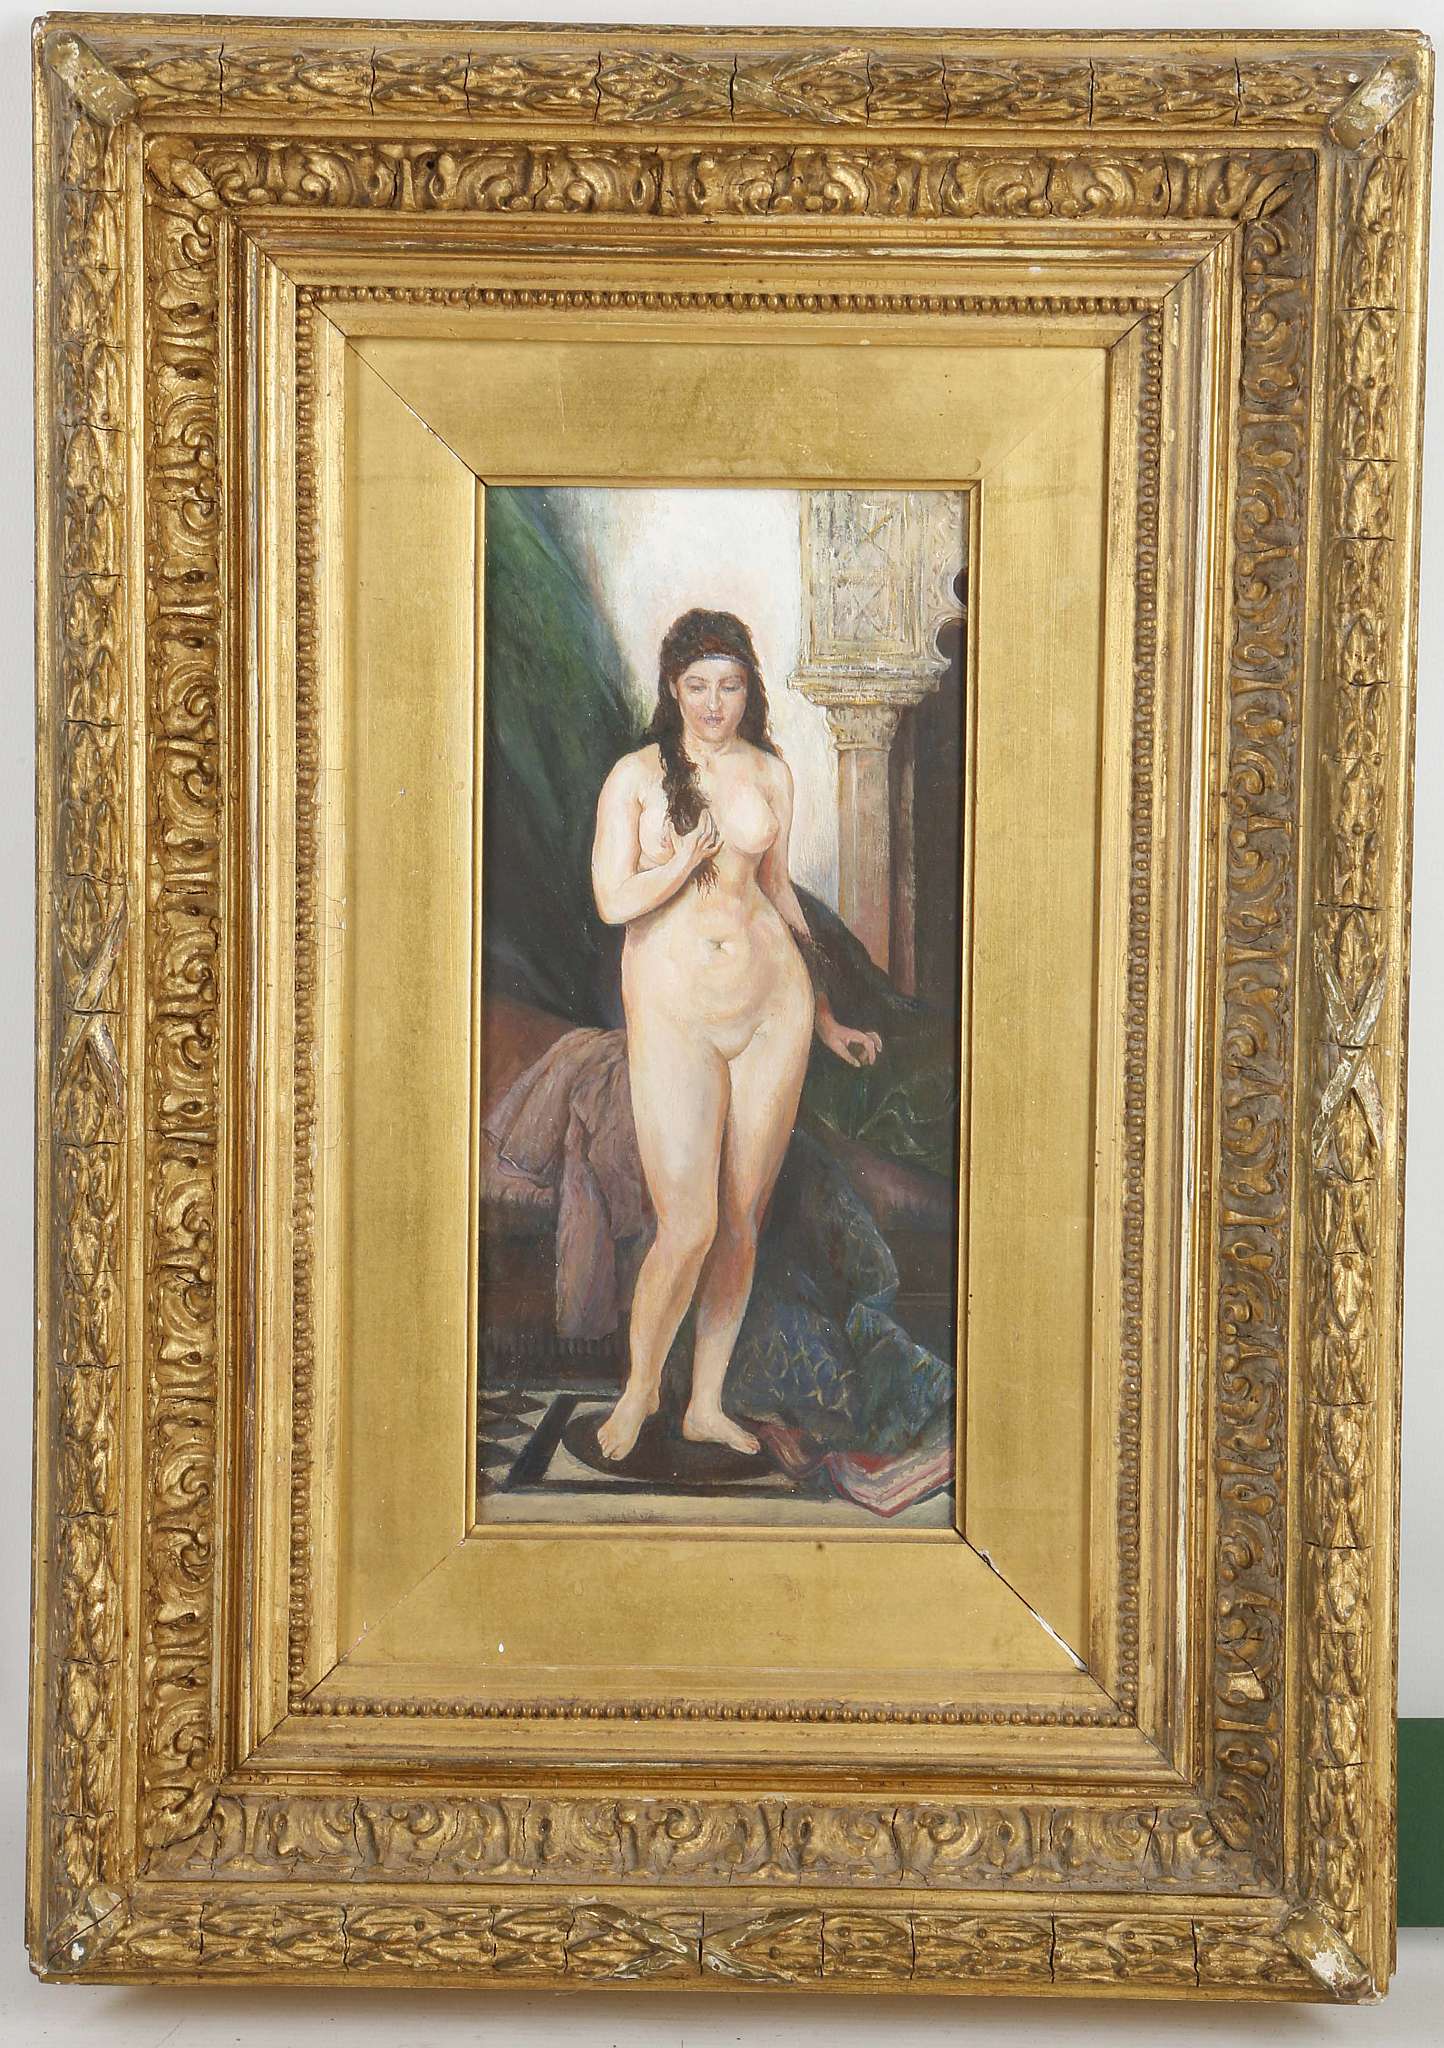 A late 20th century, gouache on card, standing nude in an interior setting. In a giltwood frame.